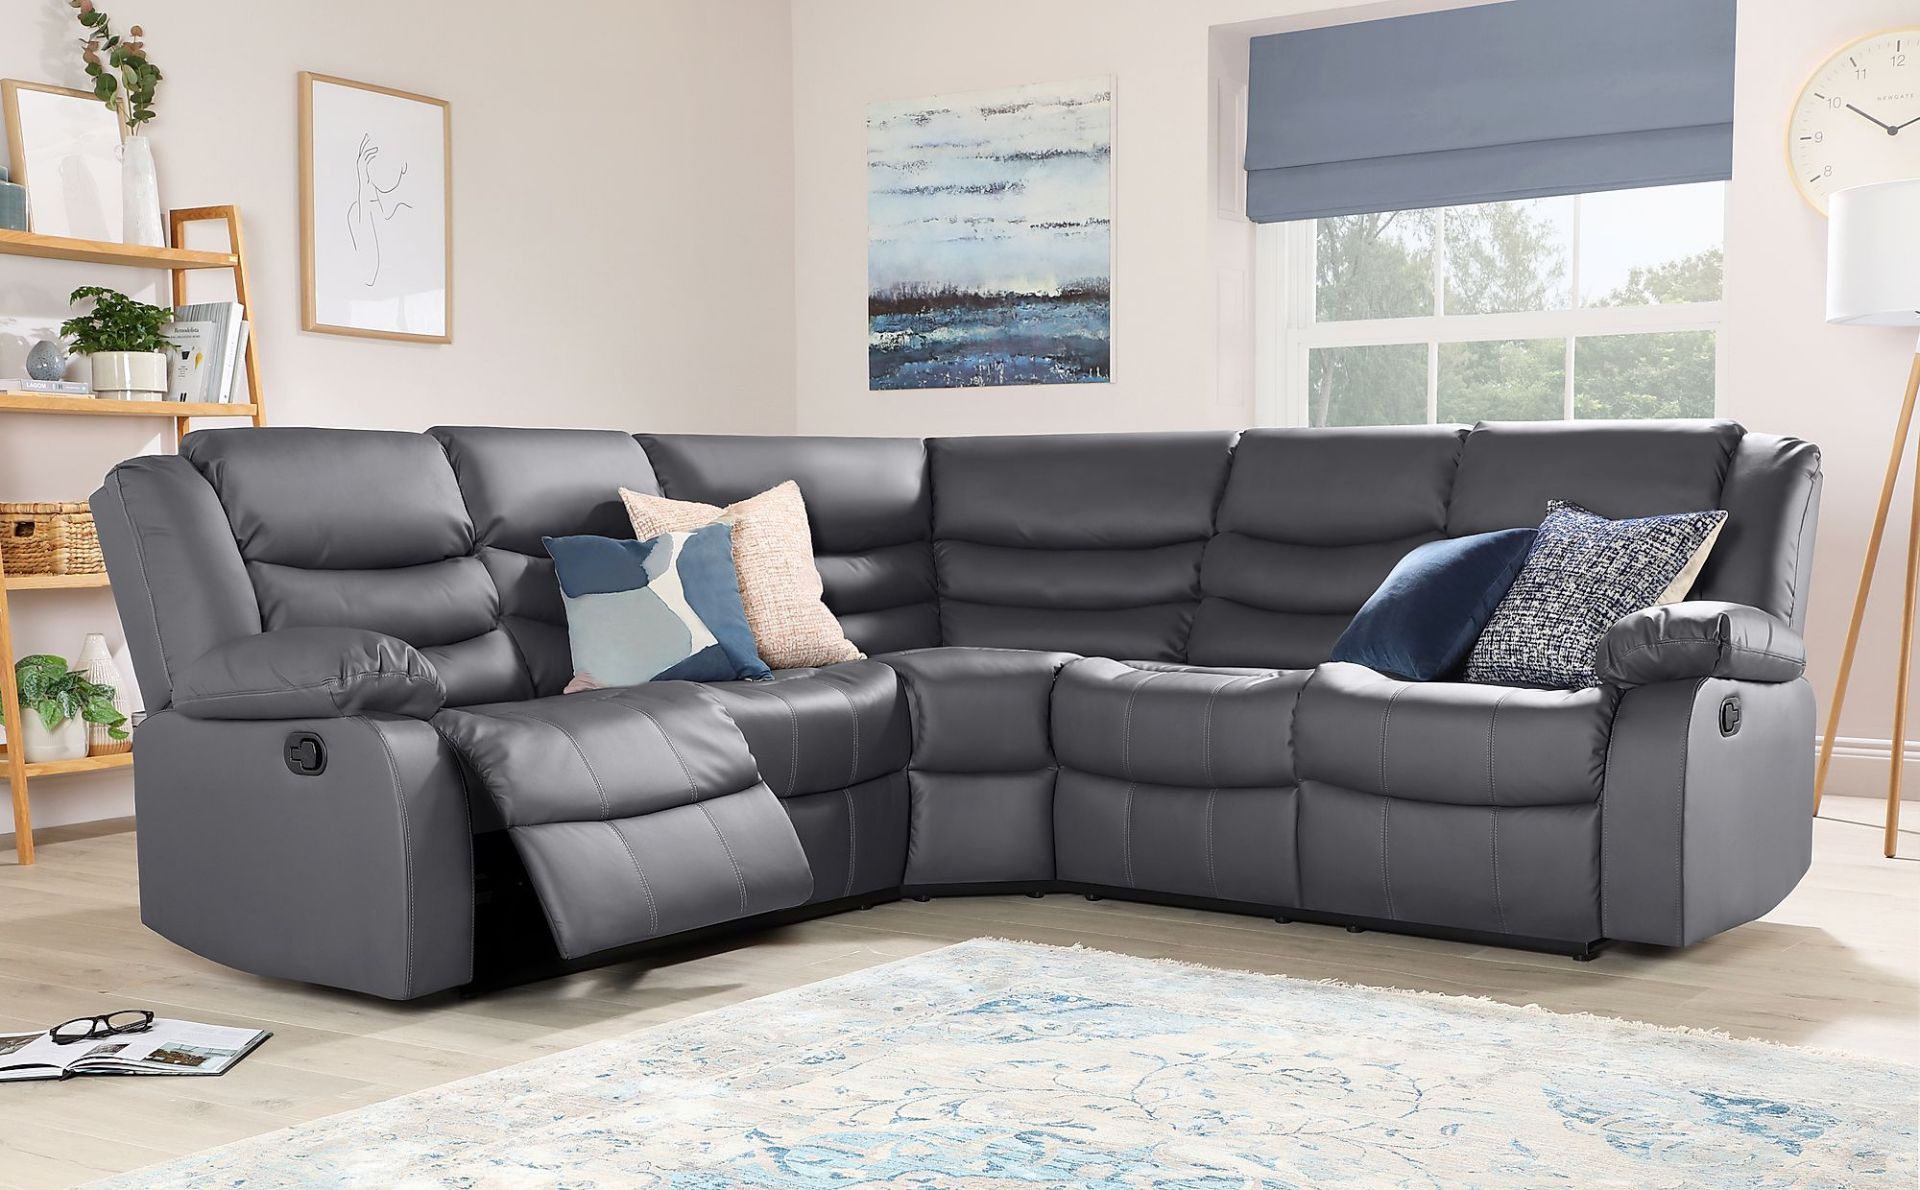 Sorrento Grey Leather recliner Seater Sofa - Condition report see lot zero - Packed in original